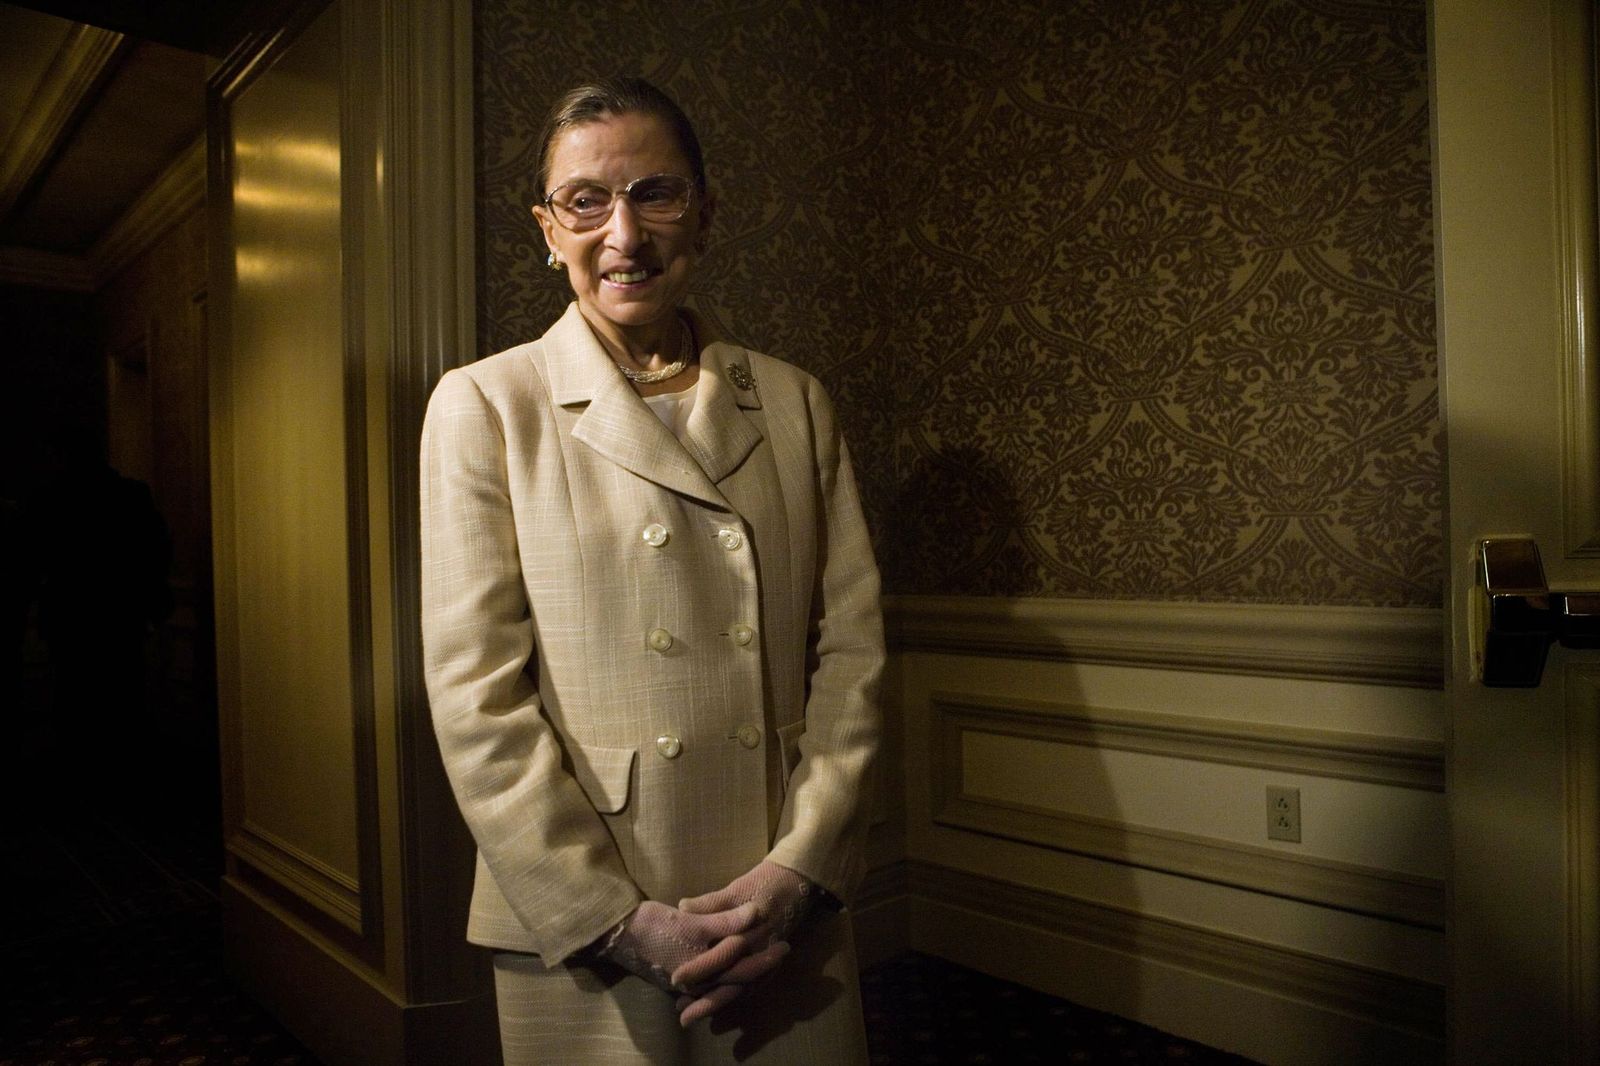 US Supreme Court Justice Ruth Bader Ginsburg at a dinner to honor Chile's first female president Michelle Bachelet on May 8, 2006, in Washington, DC. | Photo: Getty Images